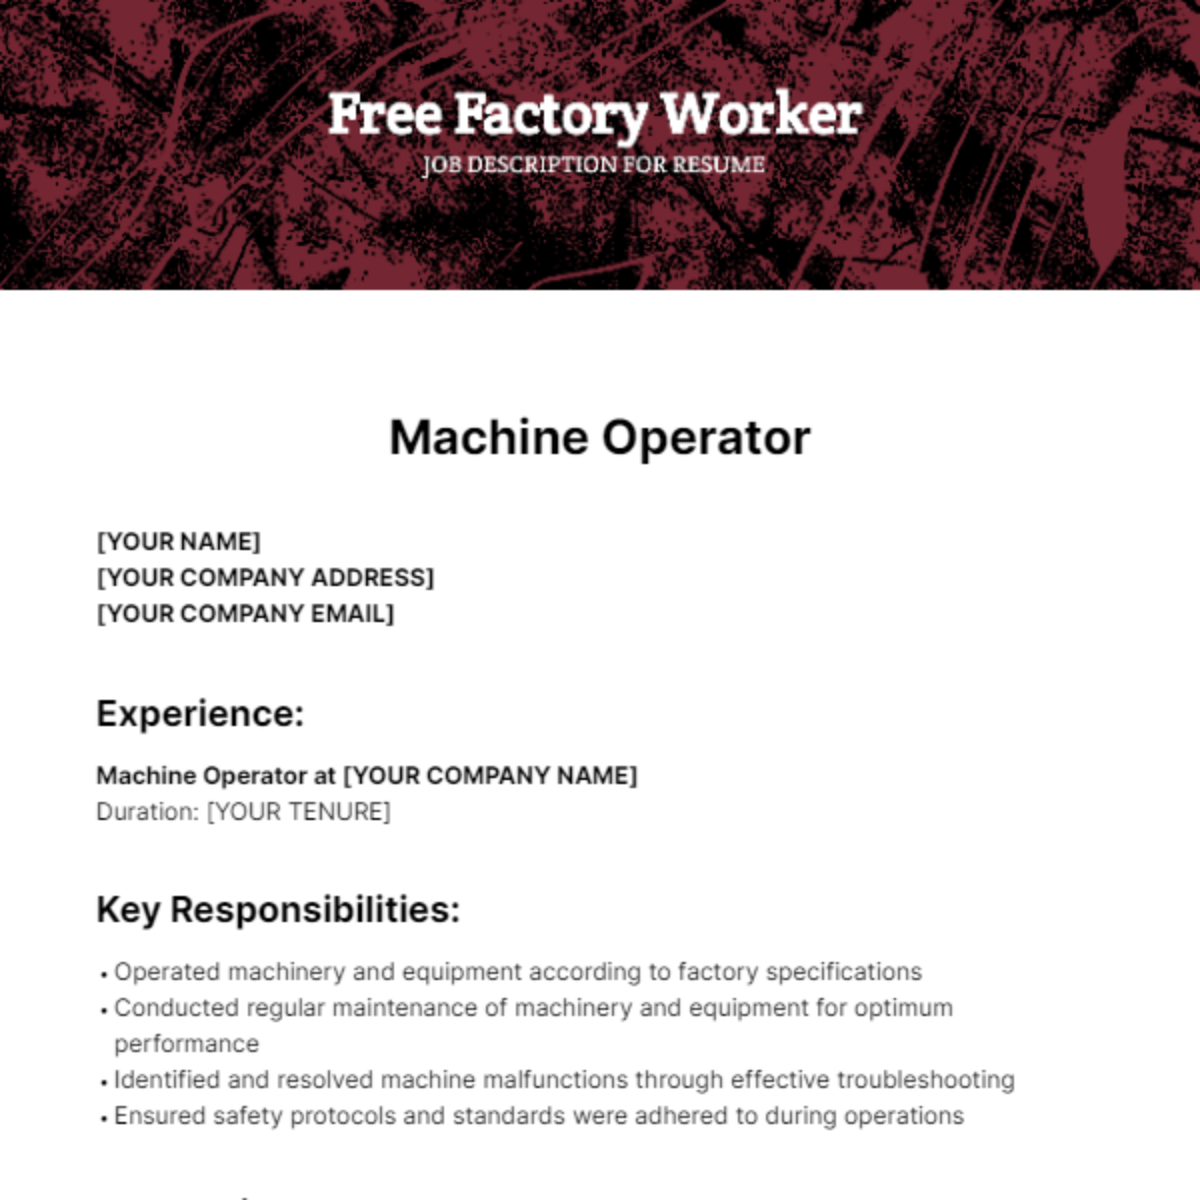 Free Factory Worker Job Description for Resume Template